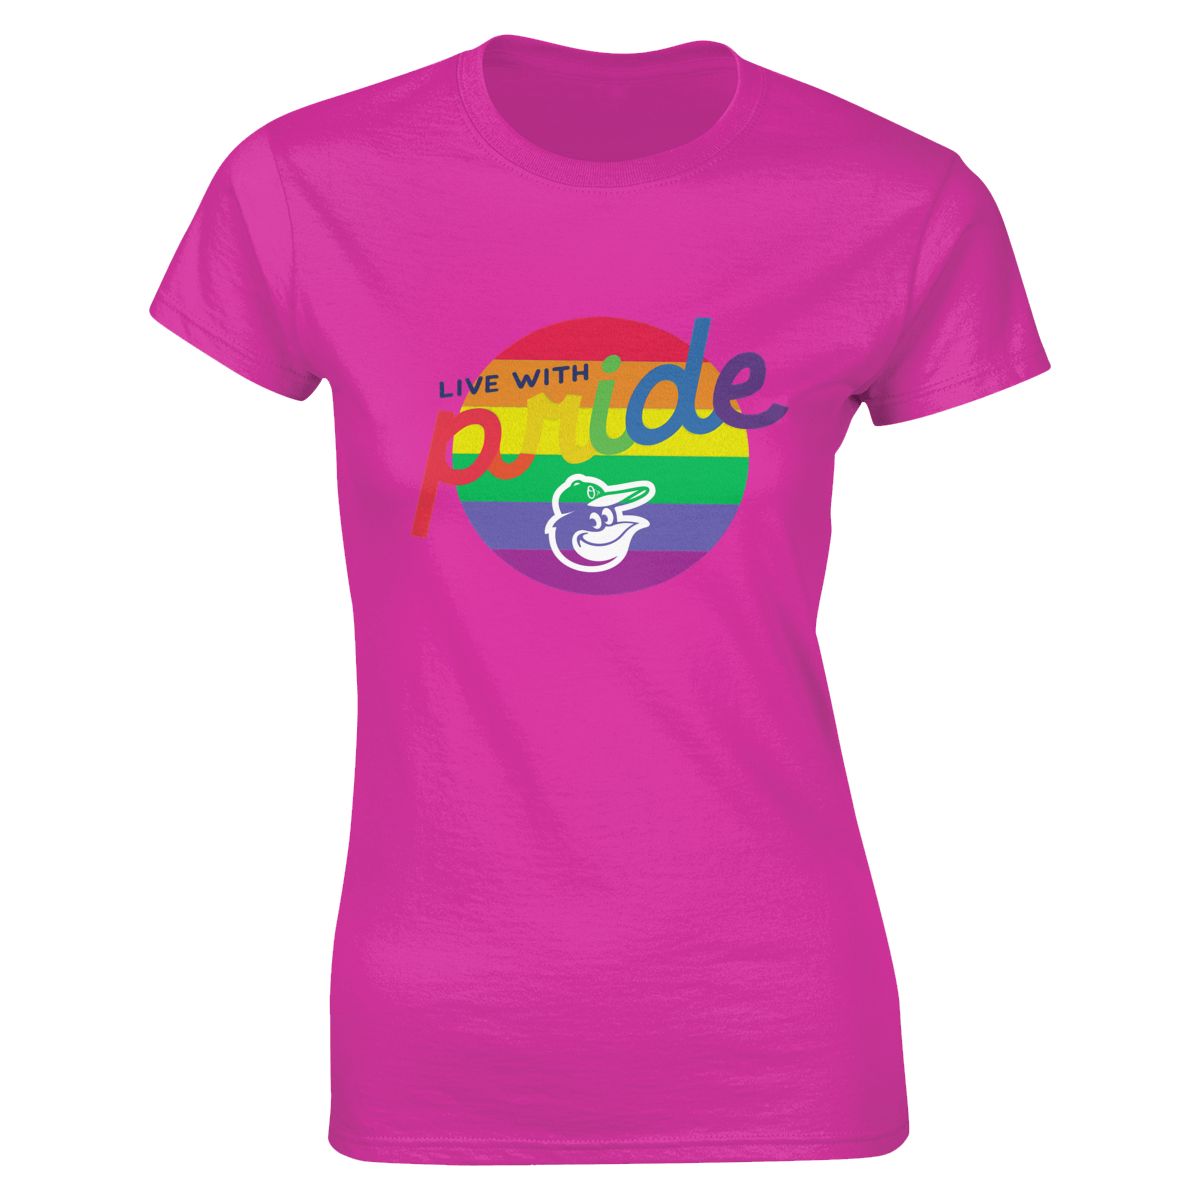 Baltimore Orioles Round LGBT Lettering Women's Short-Sleeve Cotton Tee